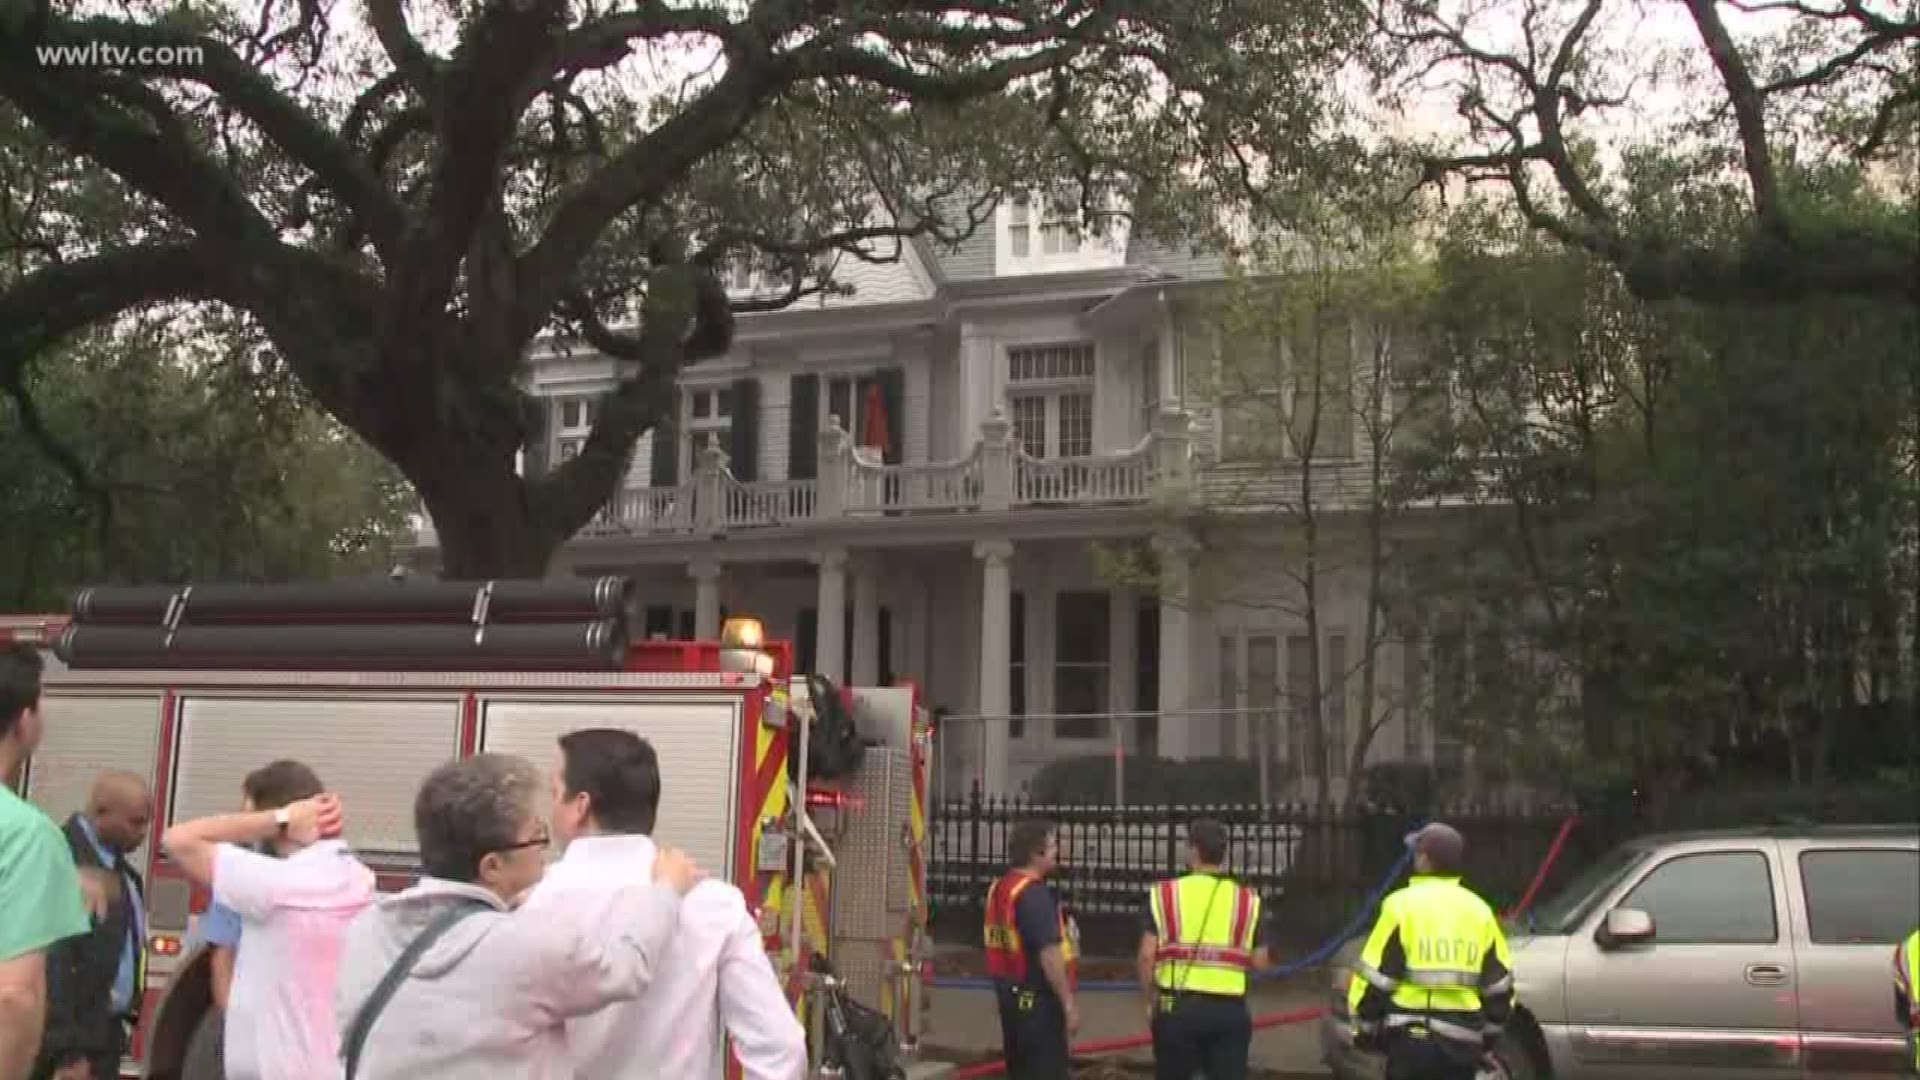 A 5-alarm fire broke out at the Downman-Kock-Montgomery-Grace family have lived in the home during the past 100 years.